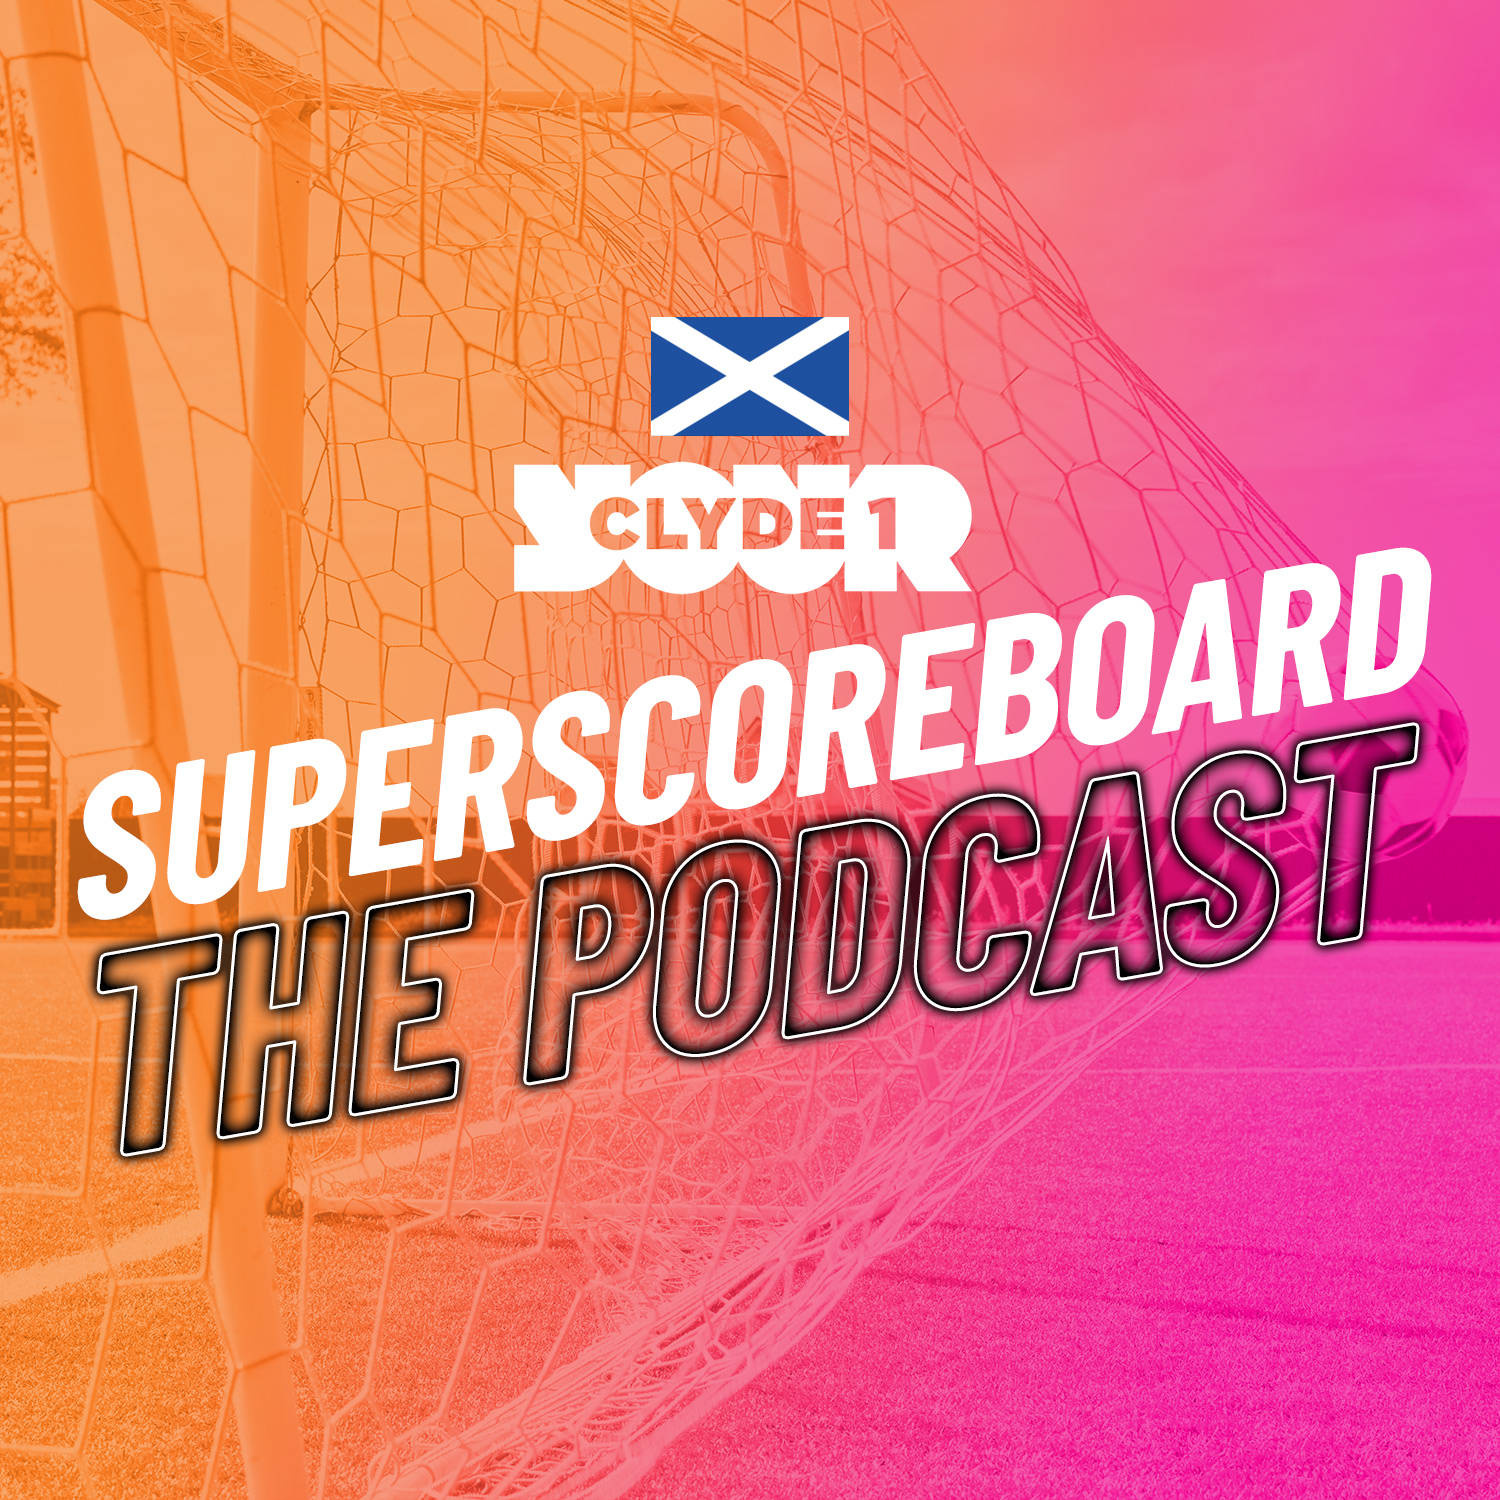 Thursday 9th May Clyde 1 Superscoreboard